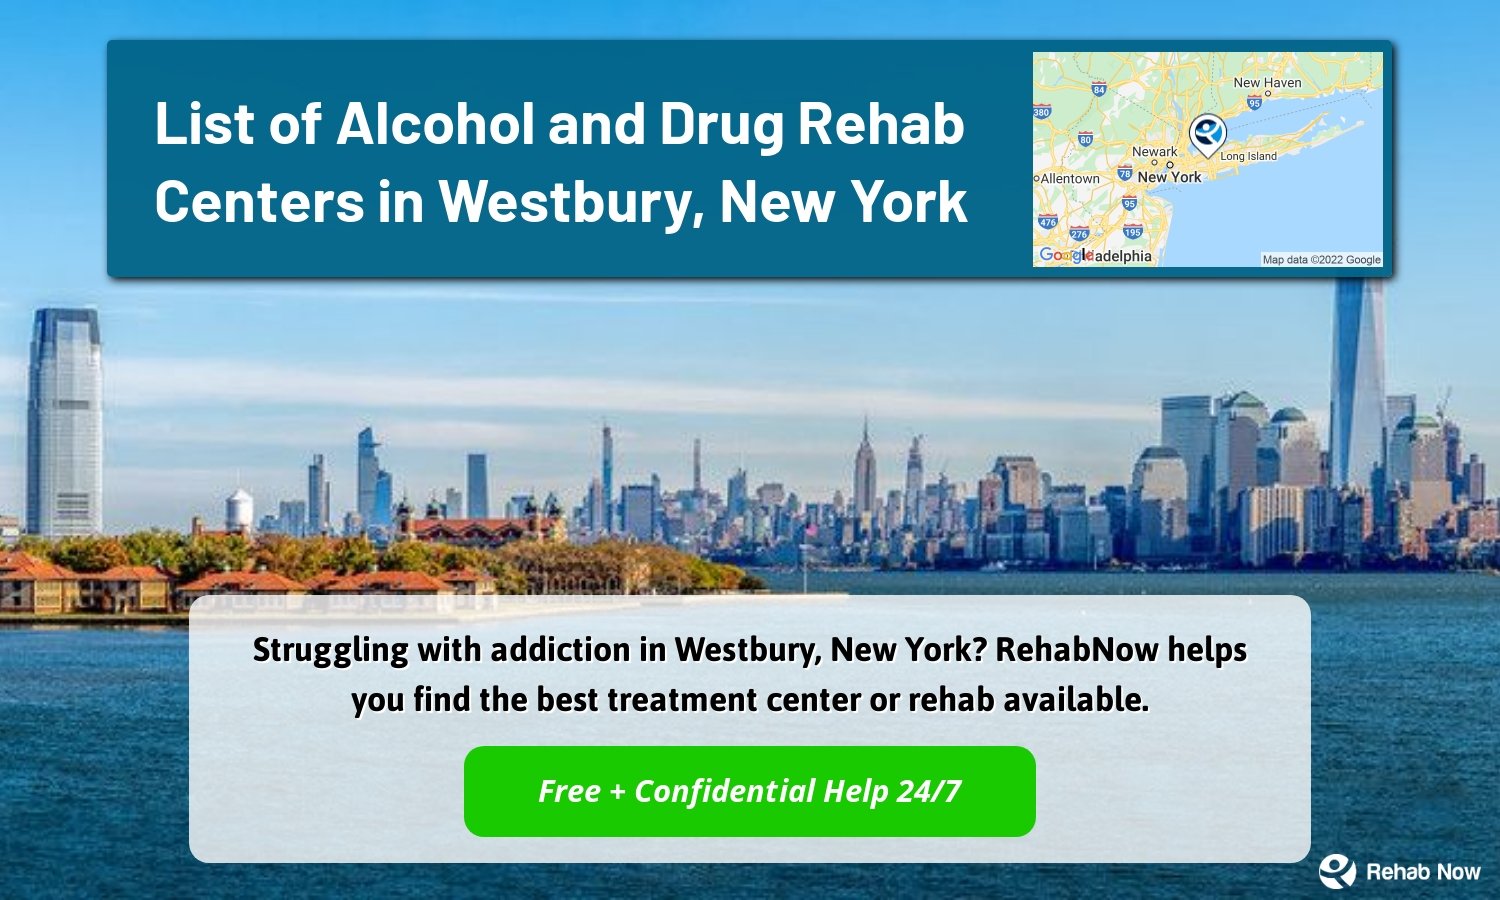 Struggling with addiction in Westbury, New York? RehabNow helps you find the best treatment center or rehab available.